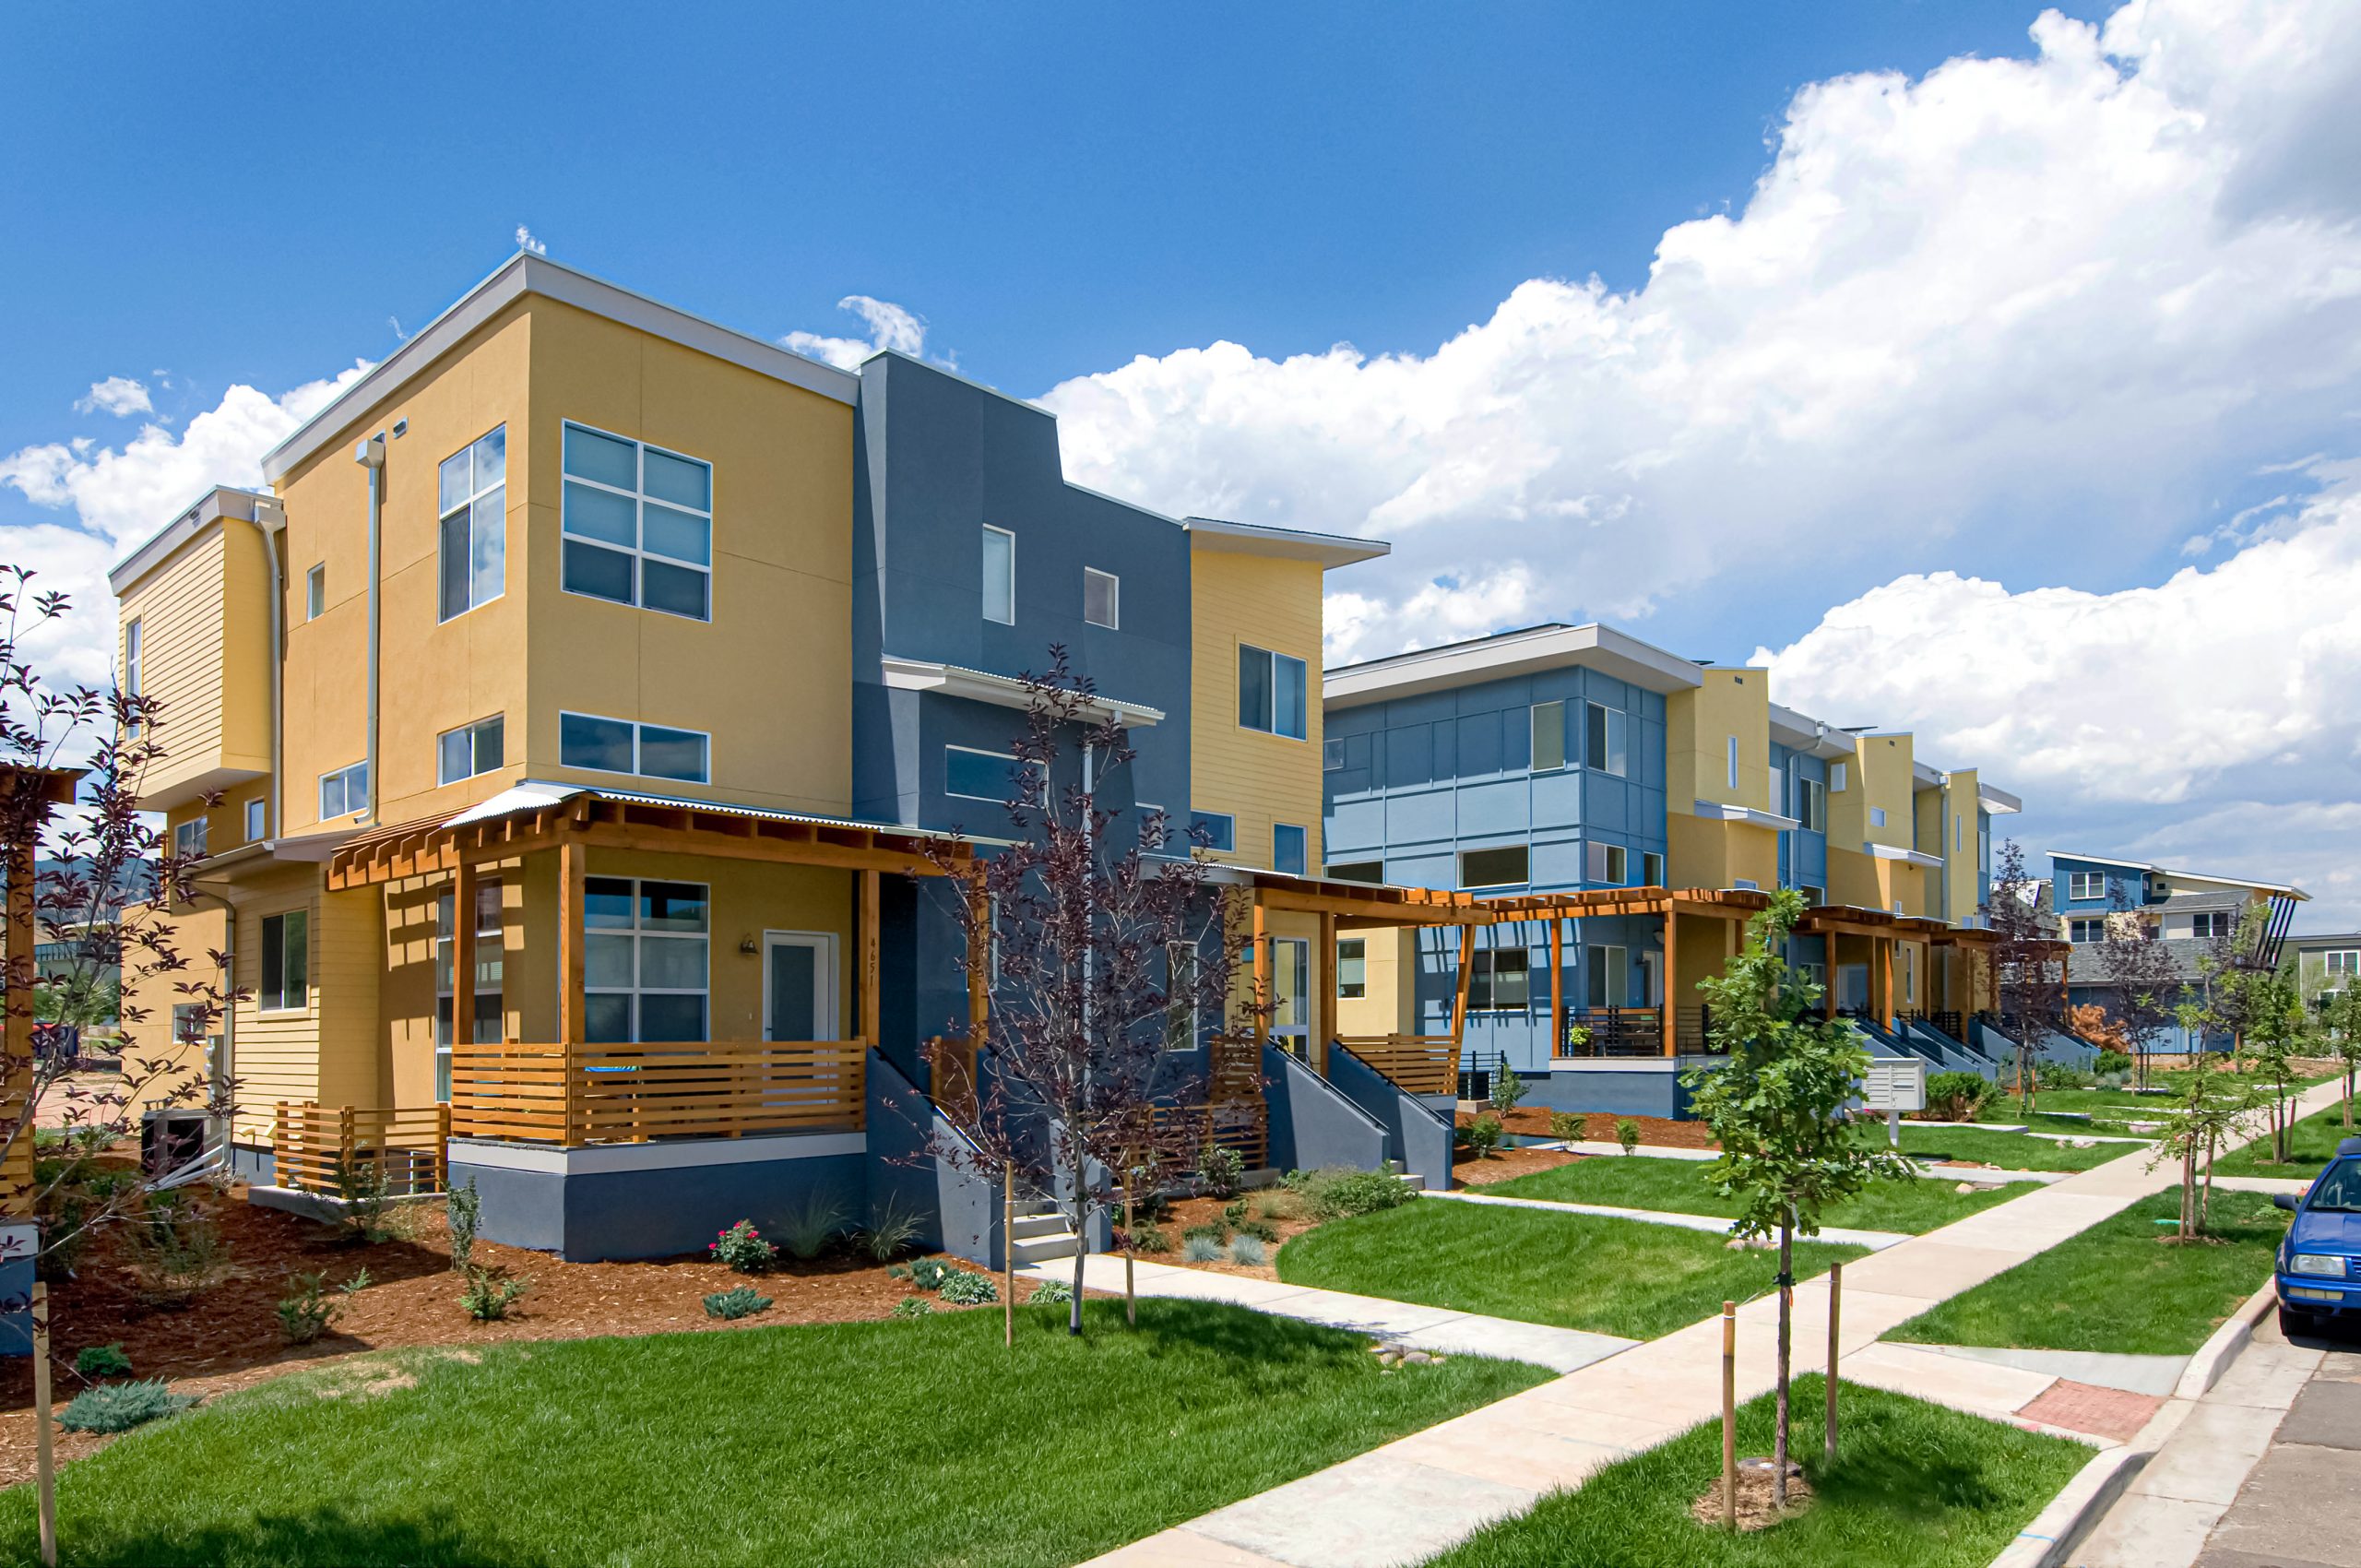 Solar Row Townhomes from the Street